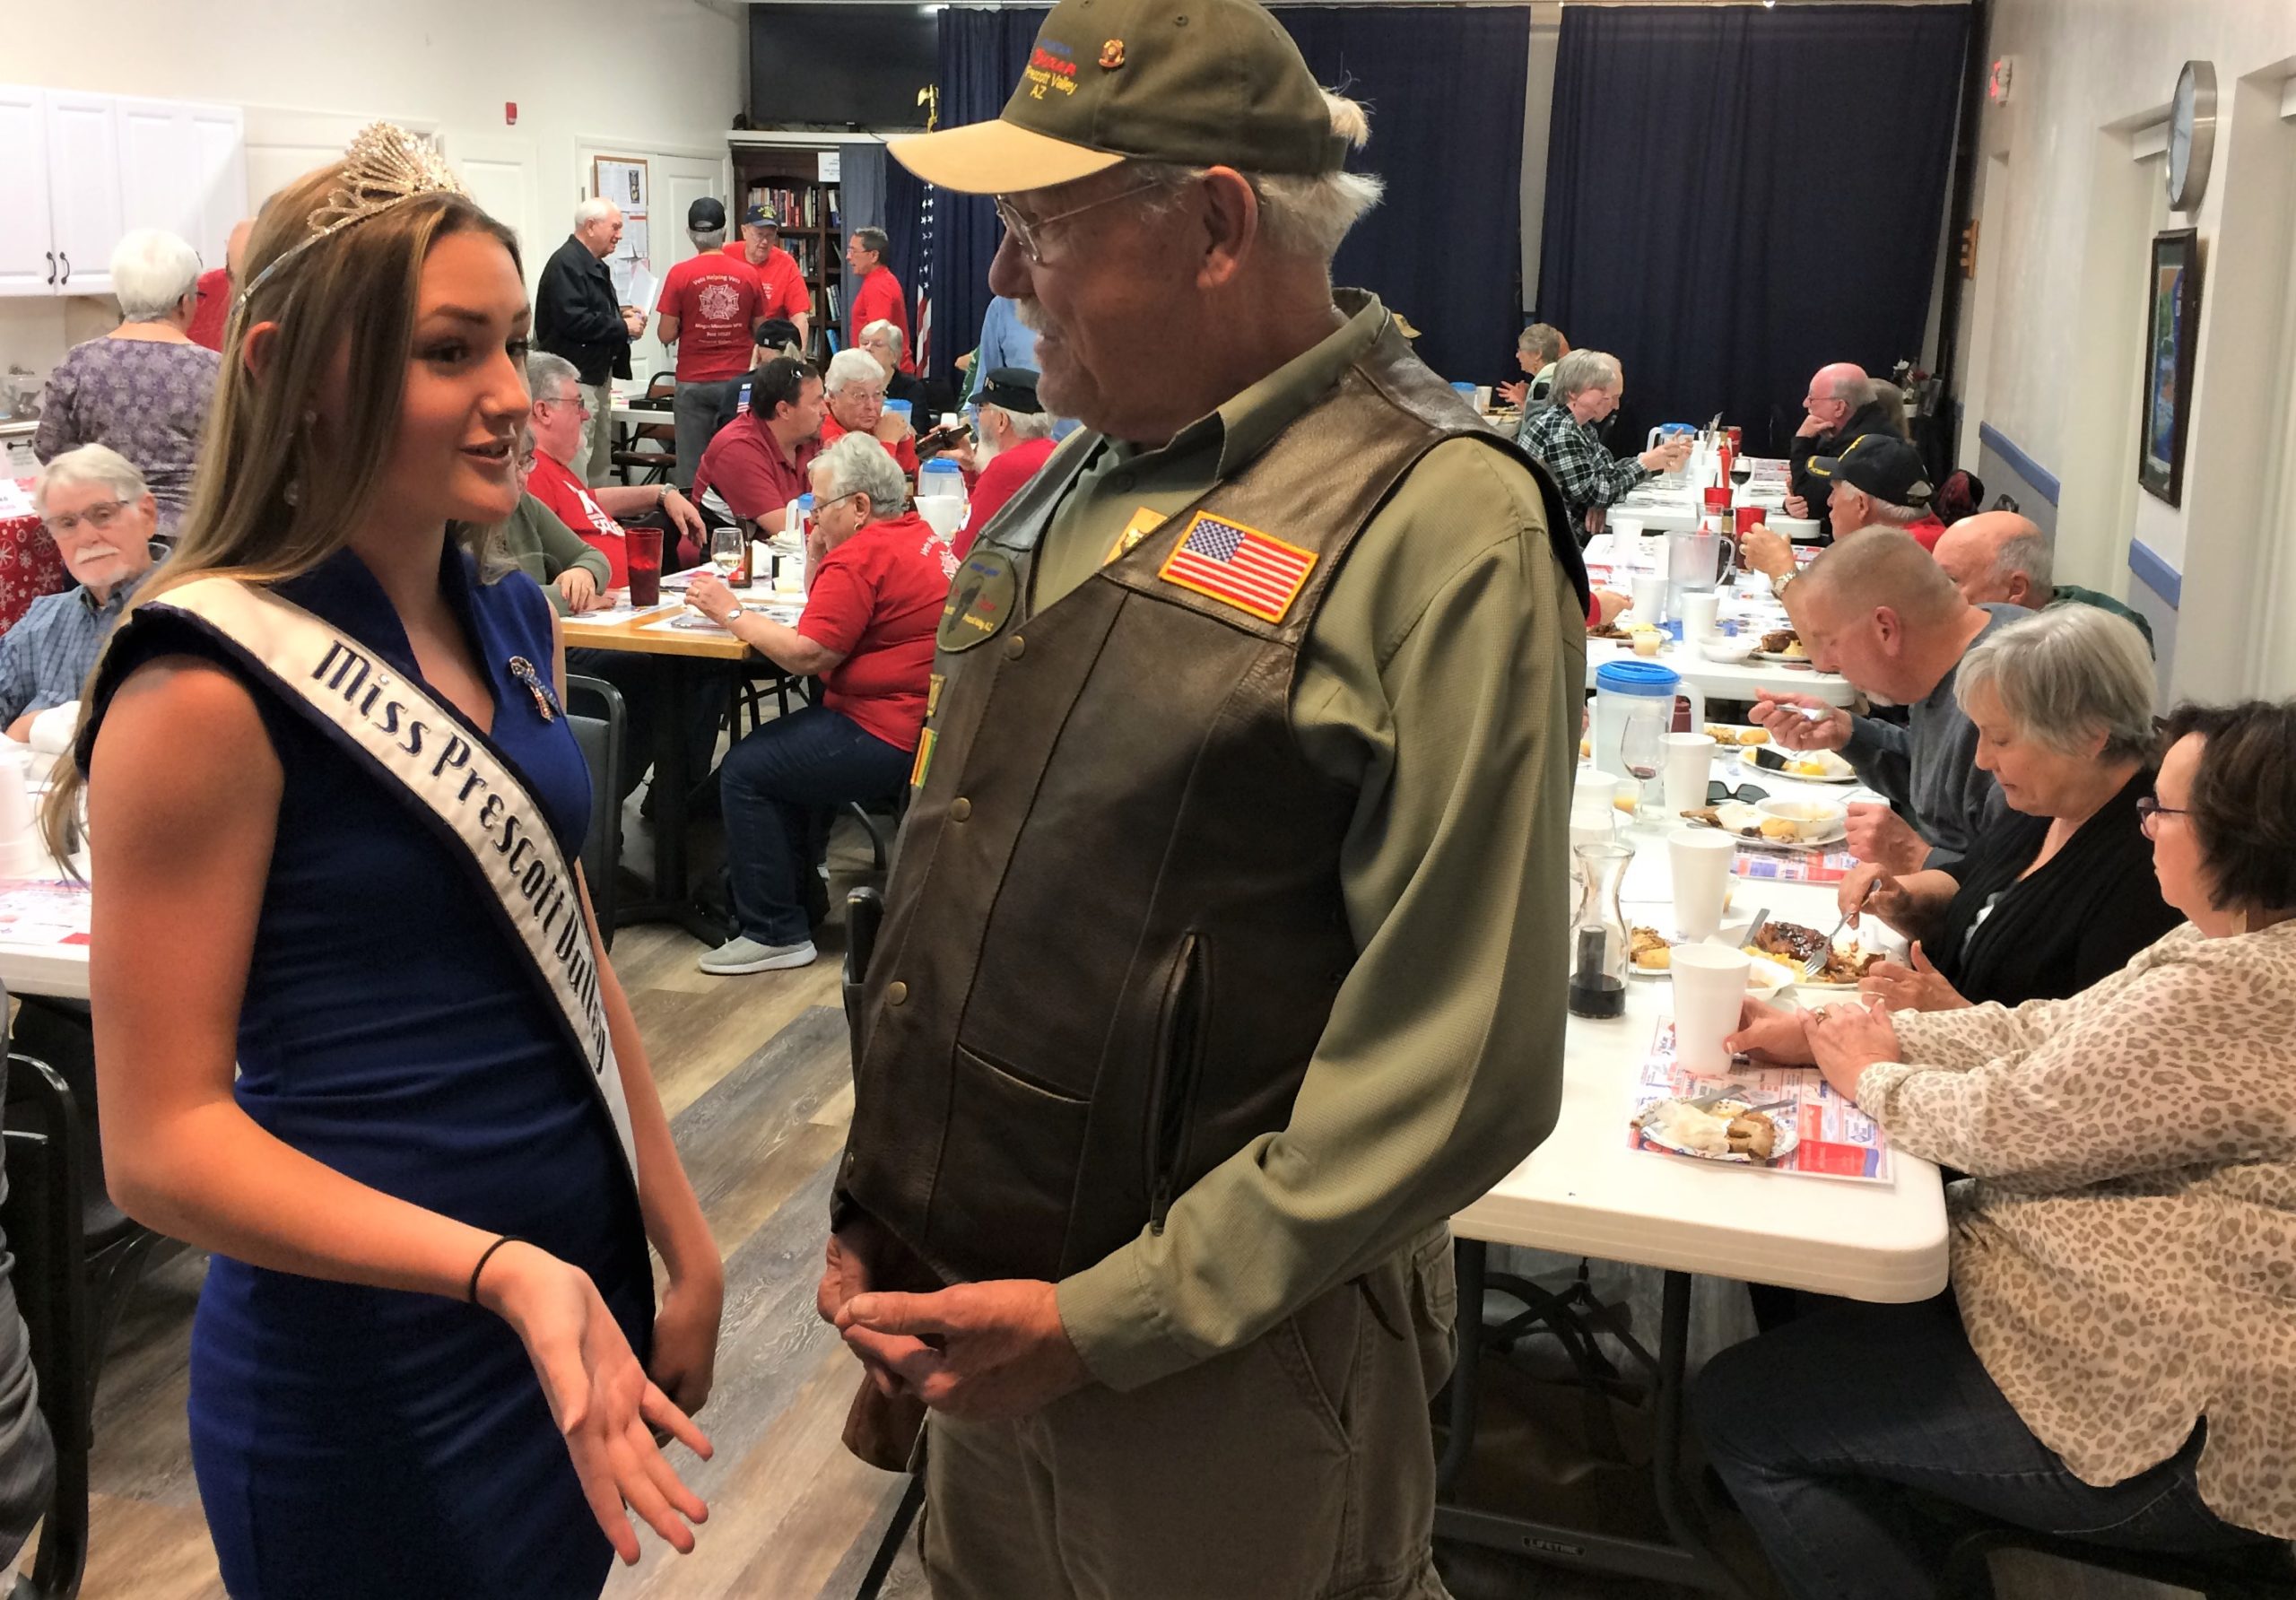 VFW Hosts Fundraiser for Vision of Vets Youth Ambassador Brooklyn Pasalich